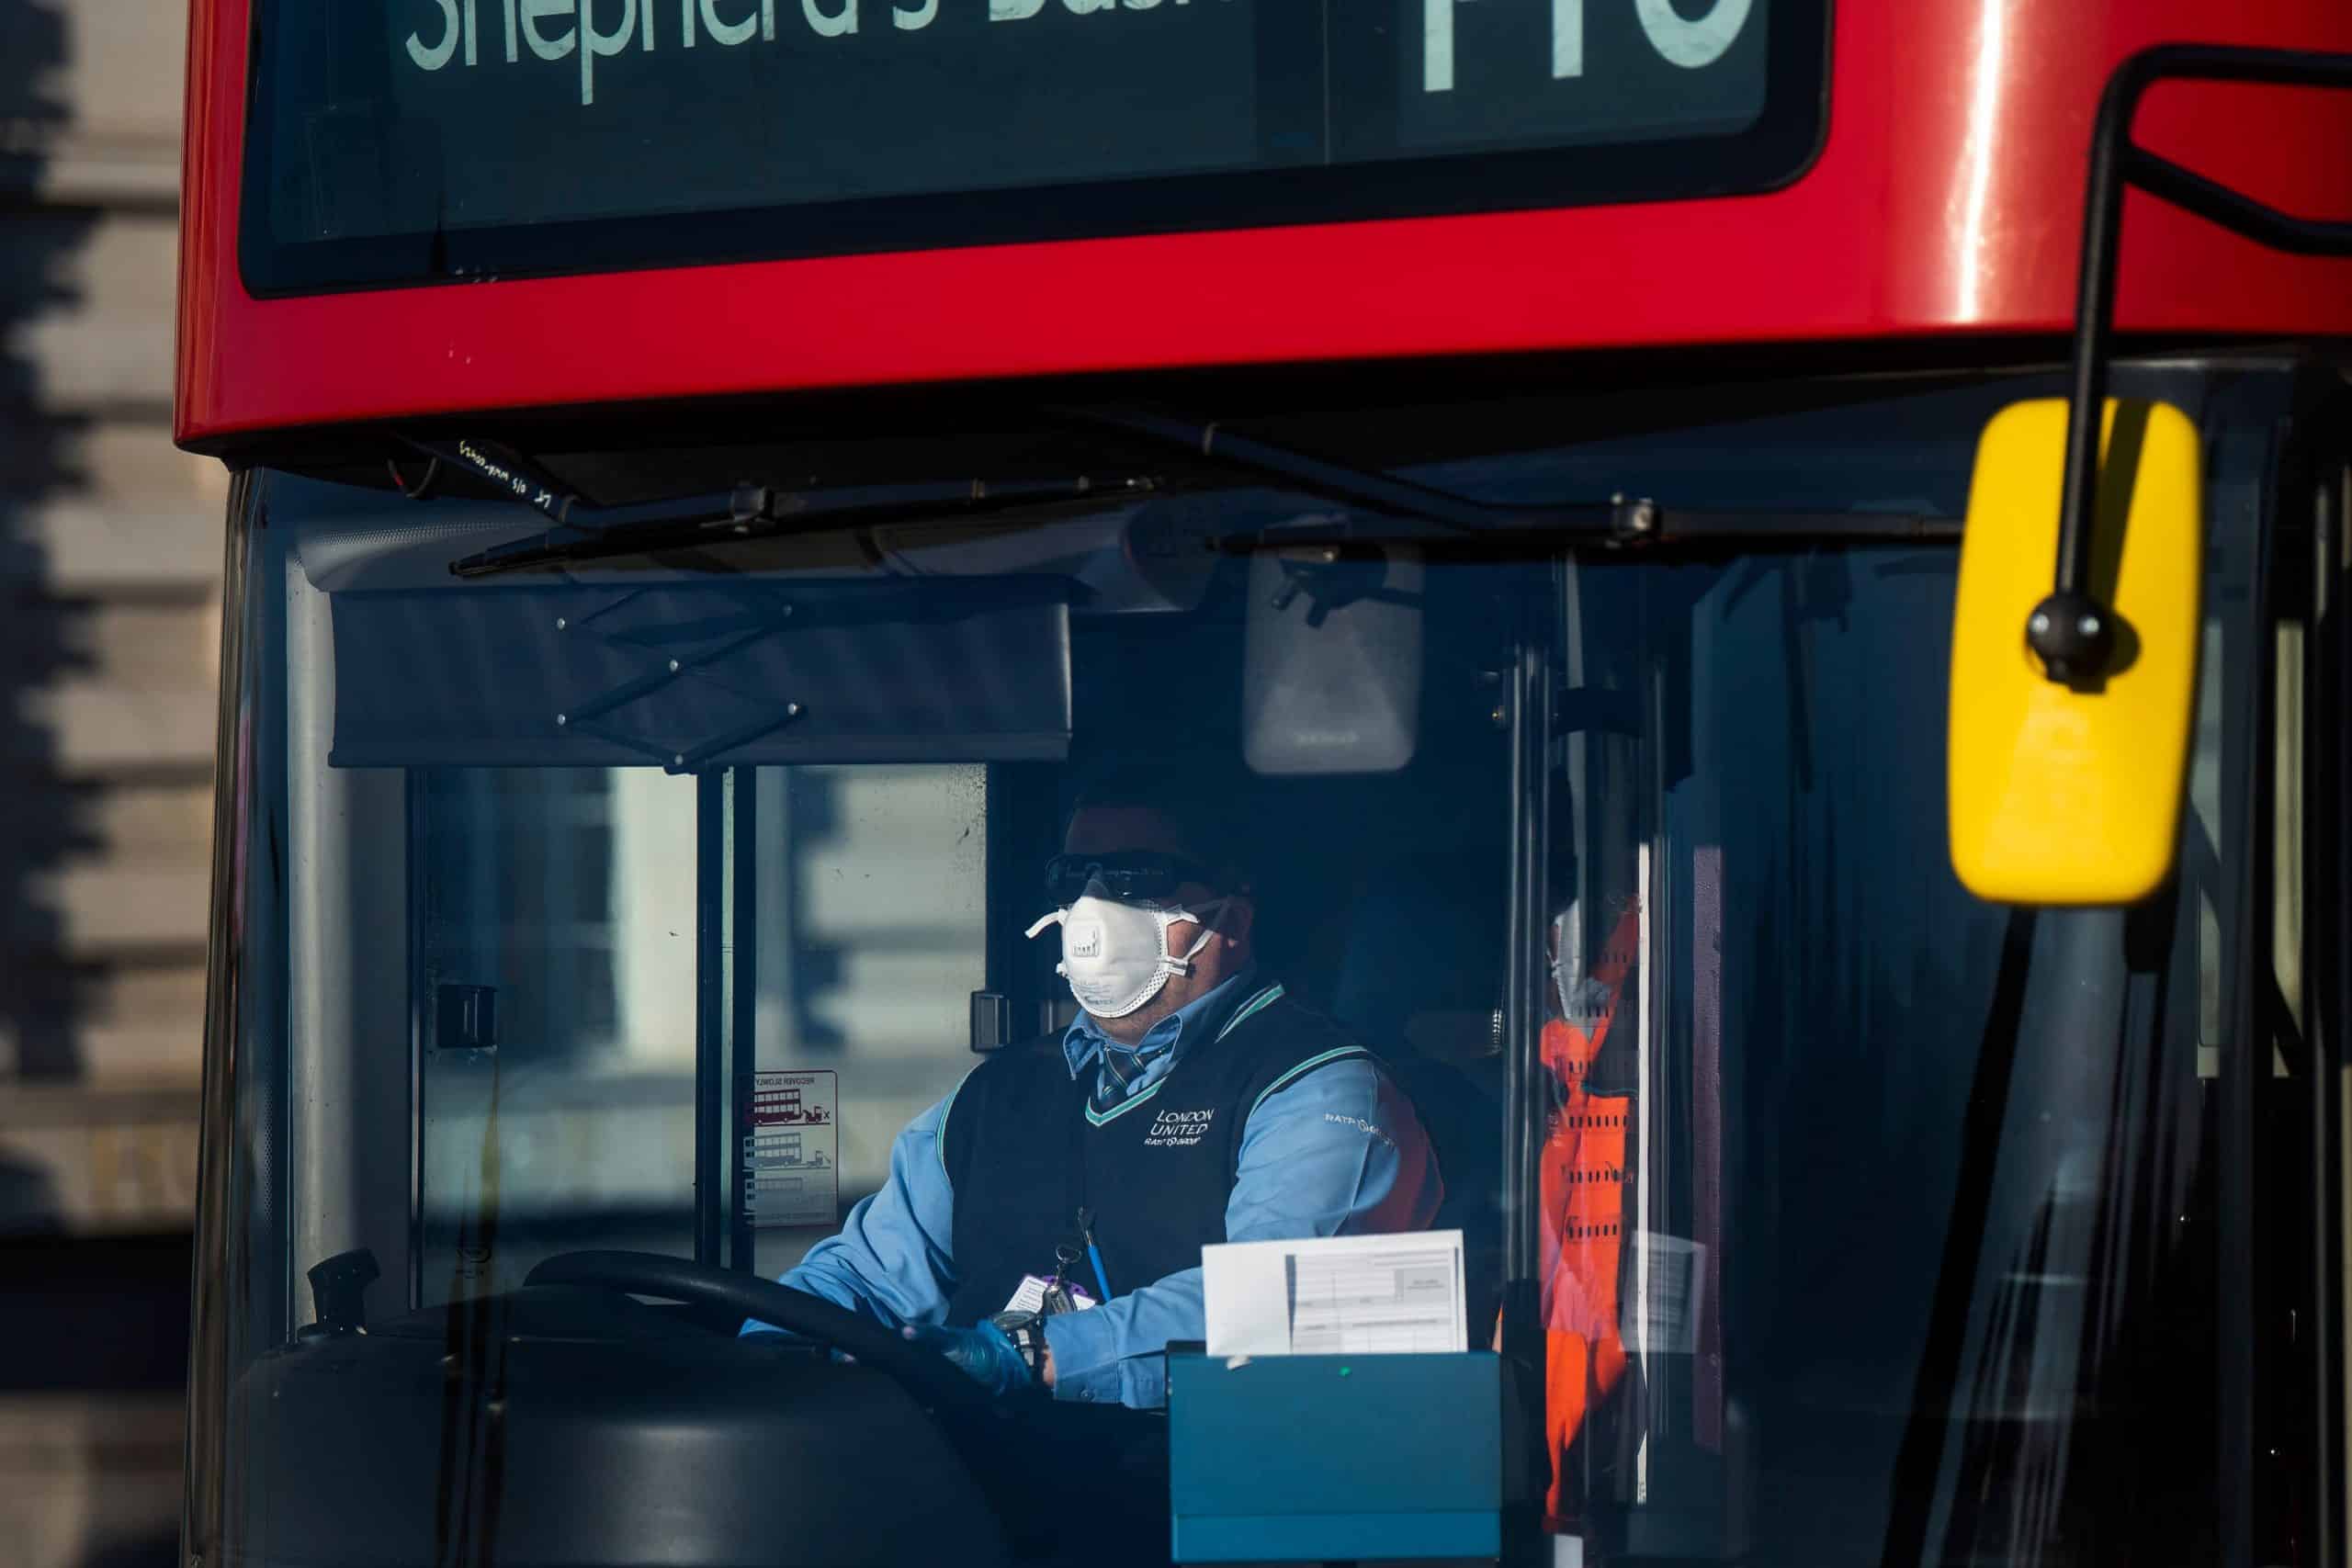 Bus fares in England to be capped at £2 from start of next year